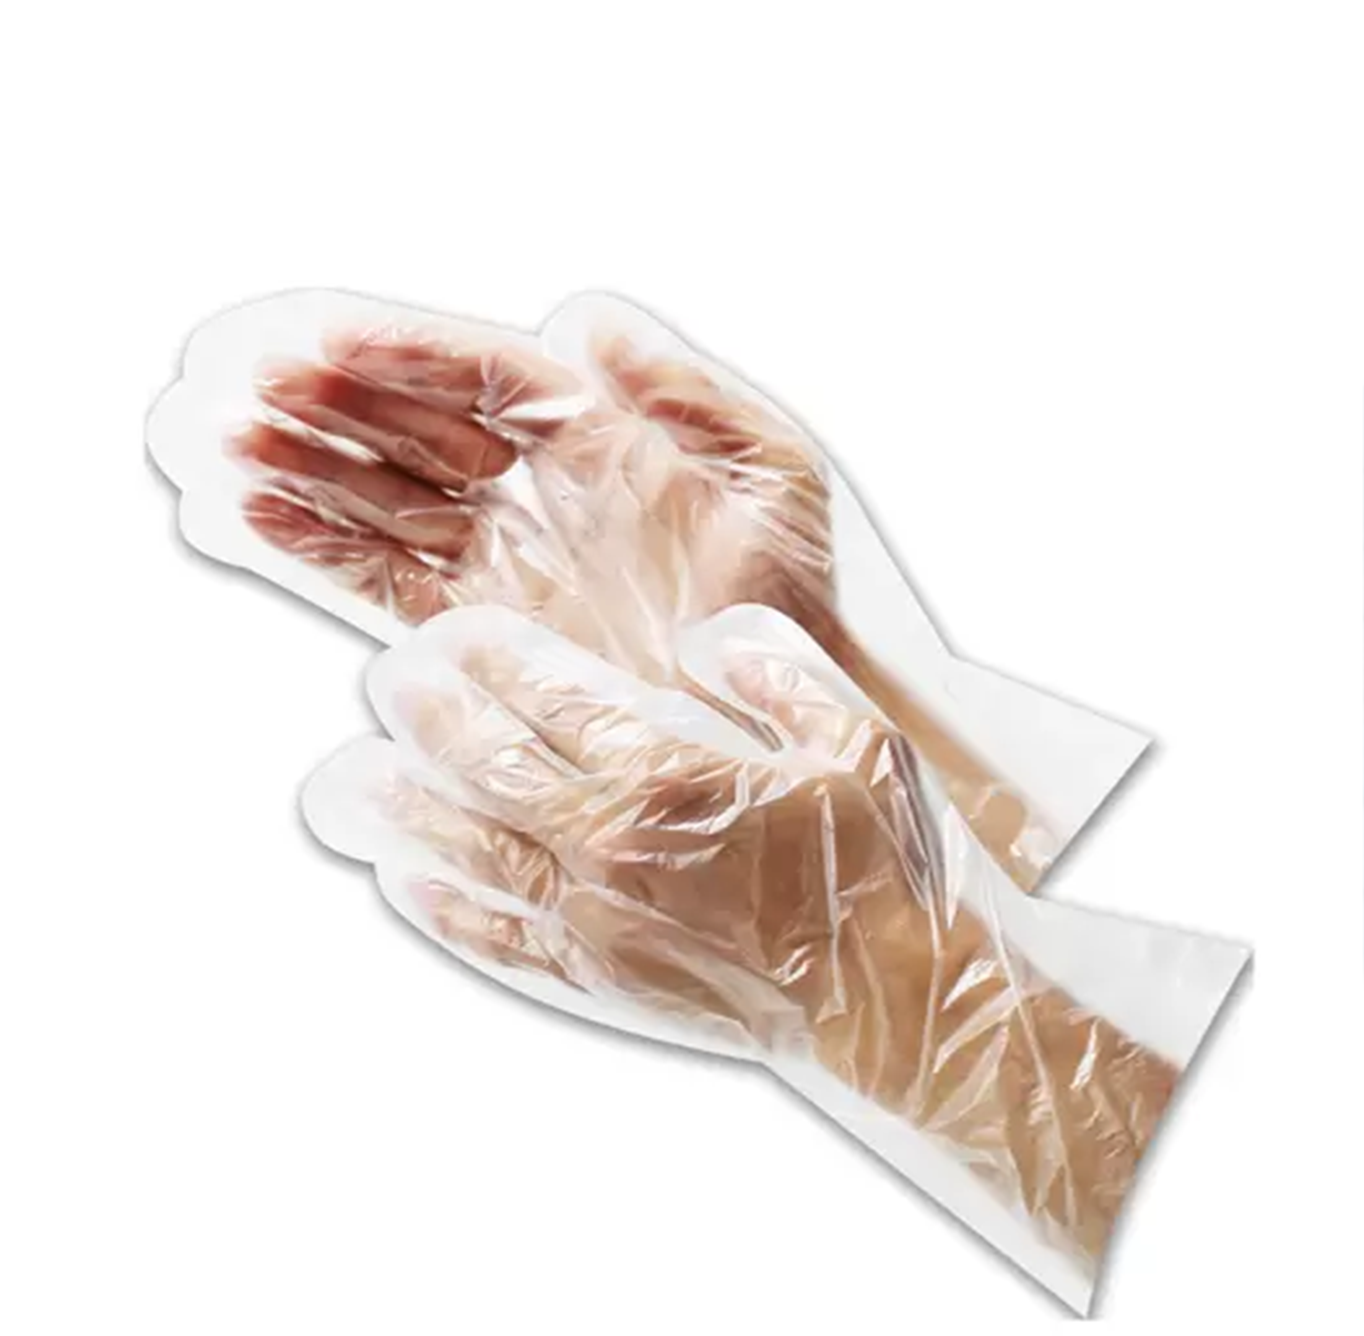 Safety Products > Gloves > Disposable Gloves > Food Grade Gloves - 1.25 MIL